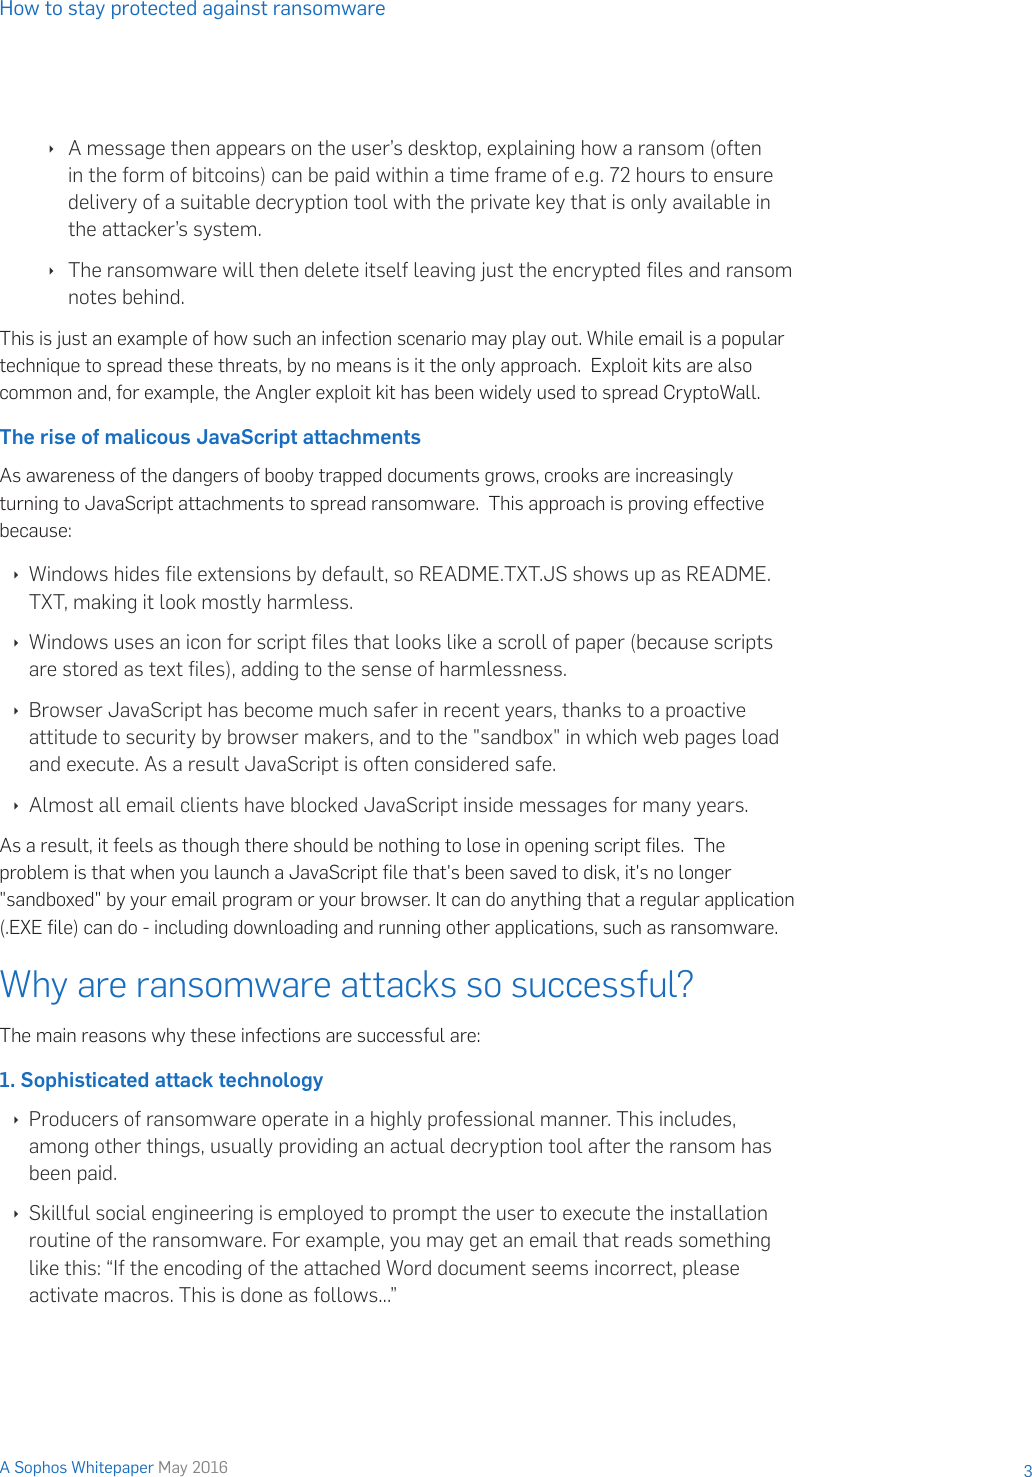 Page 3 of 12 - Sophos-ransomware-protection